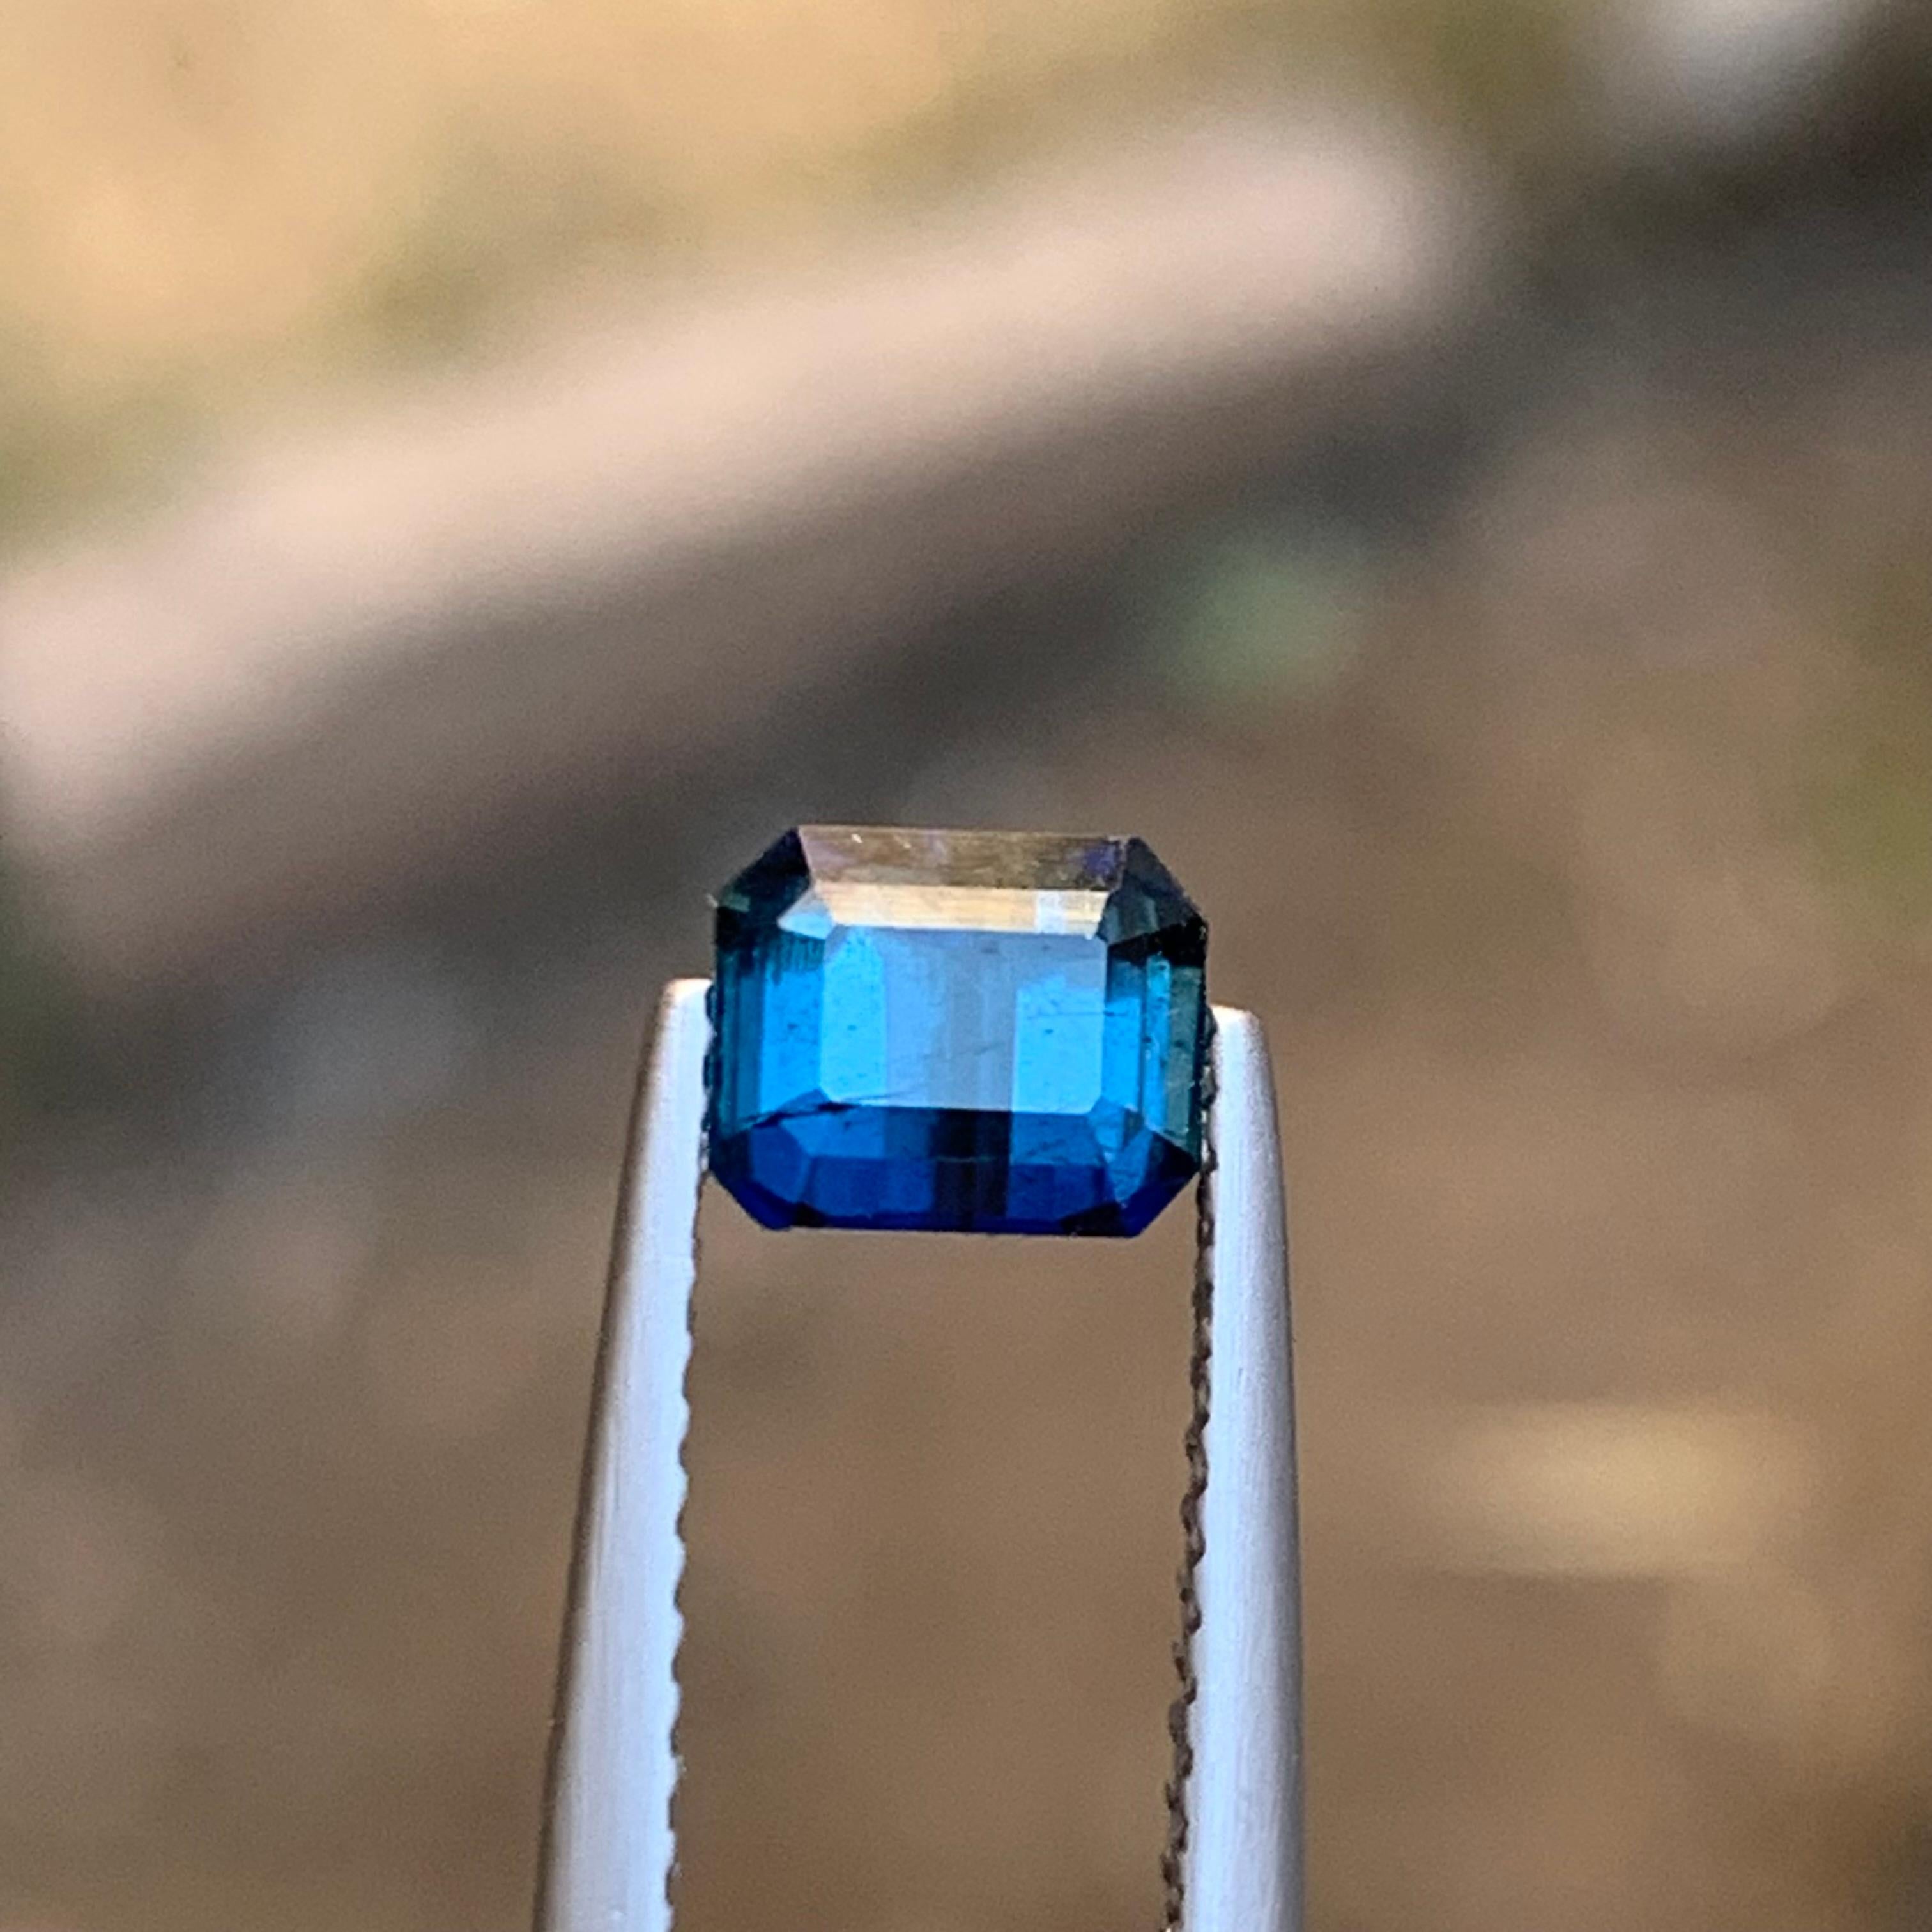 GEMSTONE TYPE: Tourmaline
PIECE(S): 1
WEIGHT: 1 Carat
SHAPE: Emerald Cut
SIZE (MM): 5 x 6.07 x 4.20
COLOR: Darkish Inky Blue
CLARITY: Slightly Included 
TREATMENT: None
ORIGIN: Afghanistan
CERTIFICATE: On demand

This stunning 1 carat tourmaline